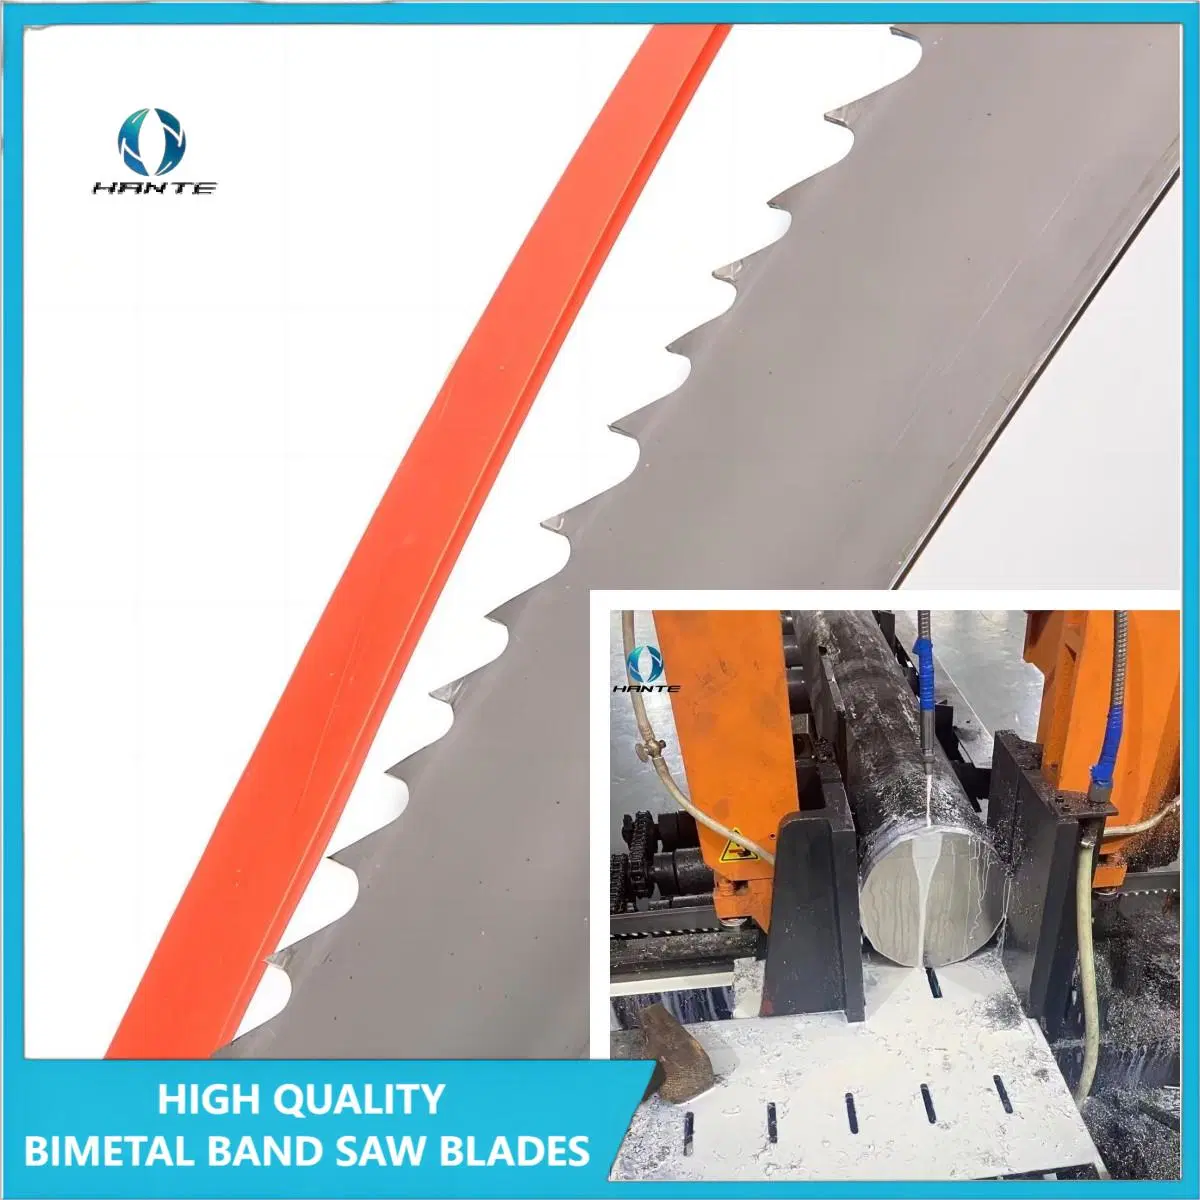 Machine Tool Bimetal Bandsaw Blade with Different Size Excellent Quality Cutting Blades 41mm*1.3 with Excellent Cutting Quality Bandsaw Machine -Band Saw Blades